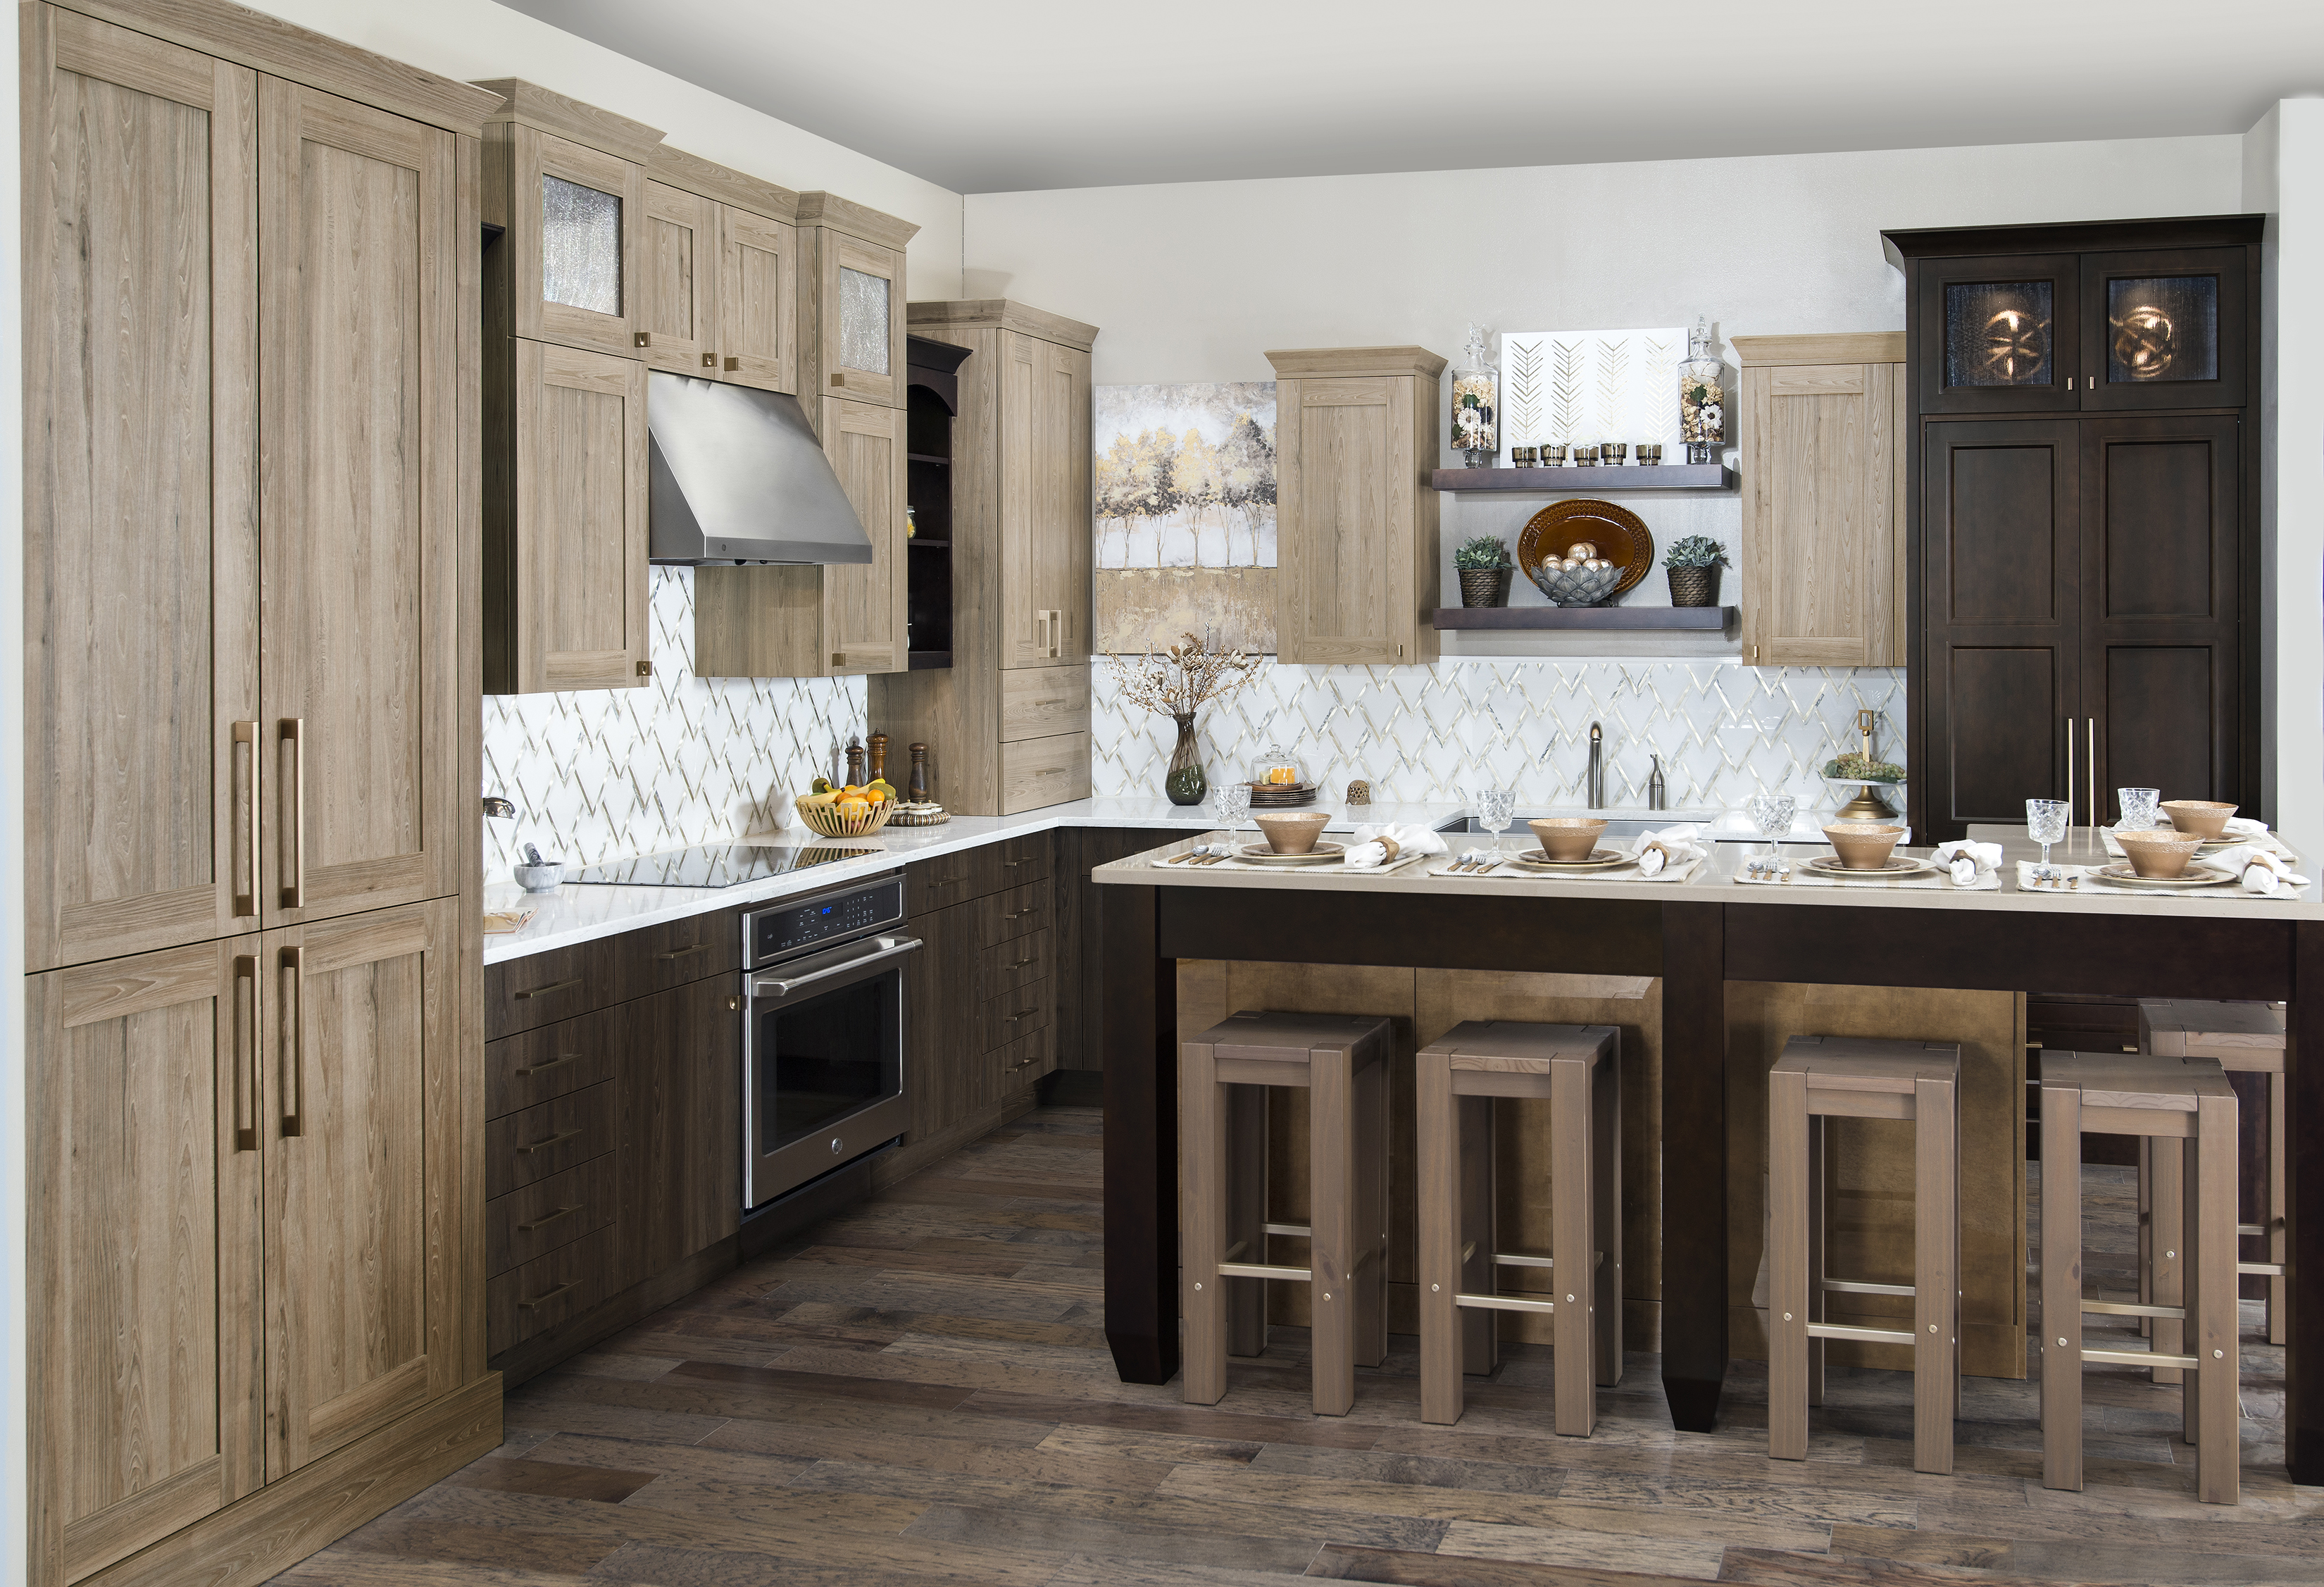 Cabinets in resurgence at KBIS/IBS show | Woodworking Network